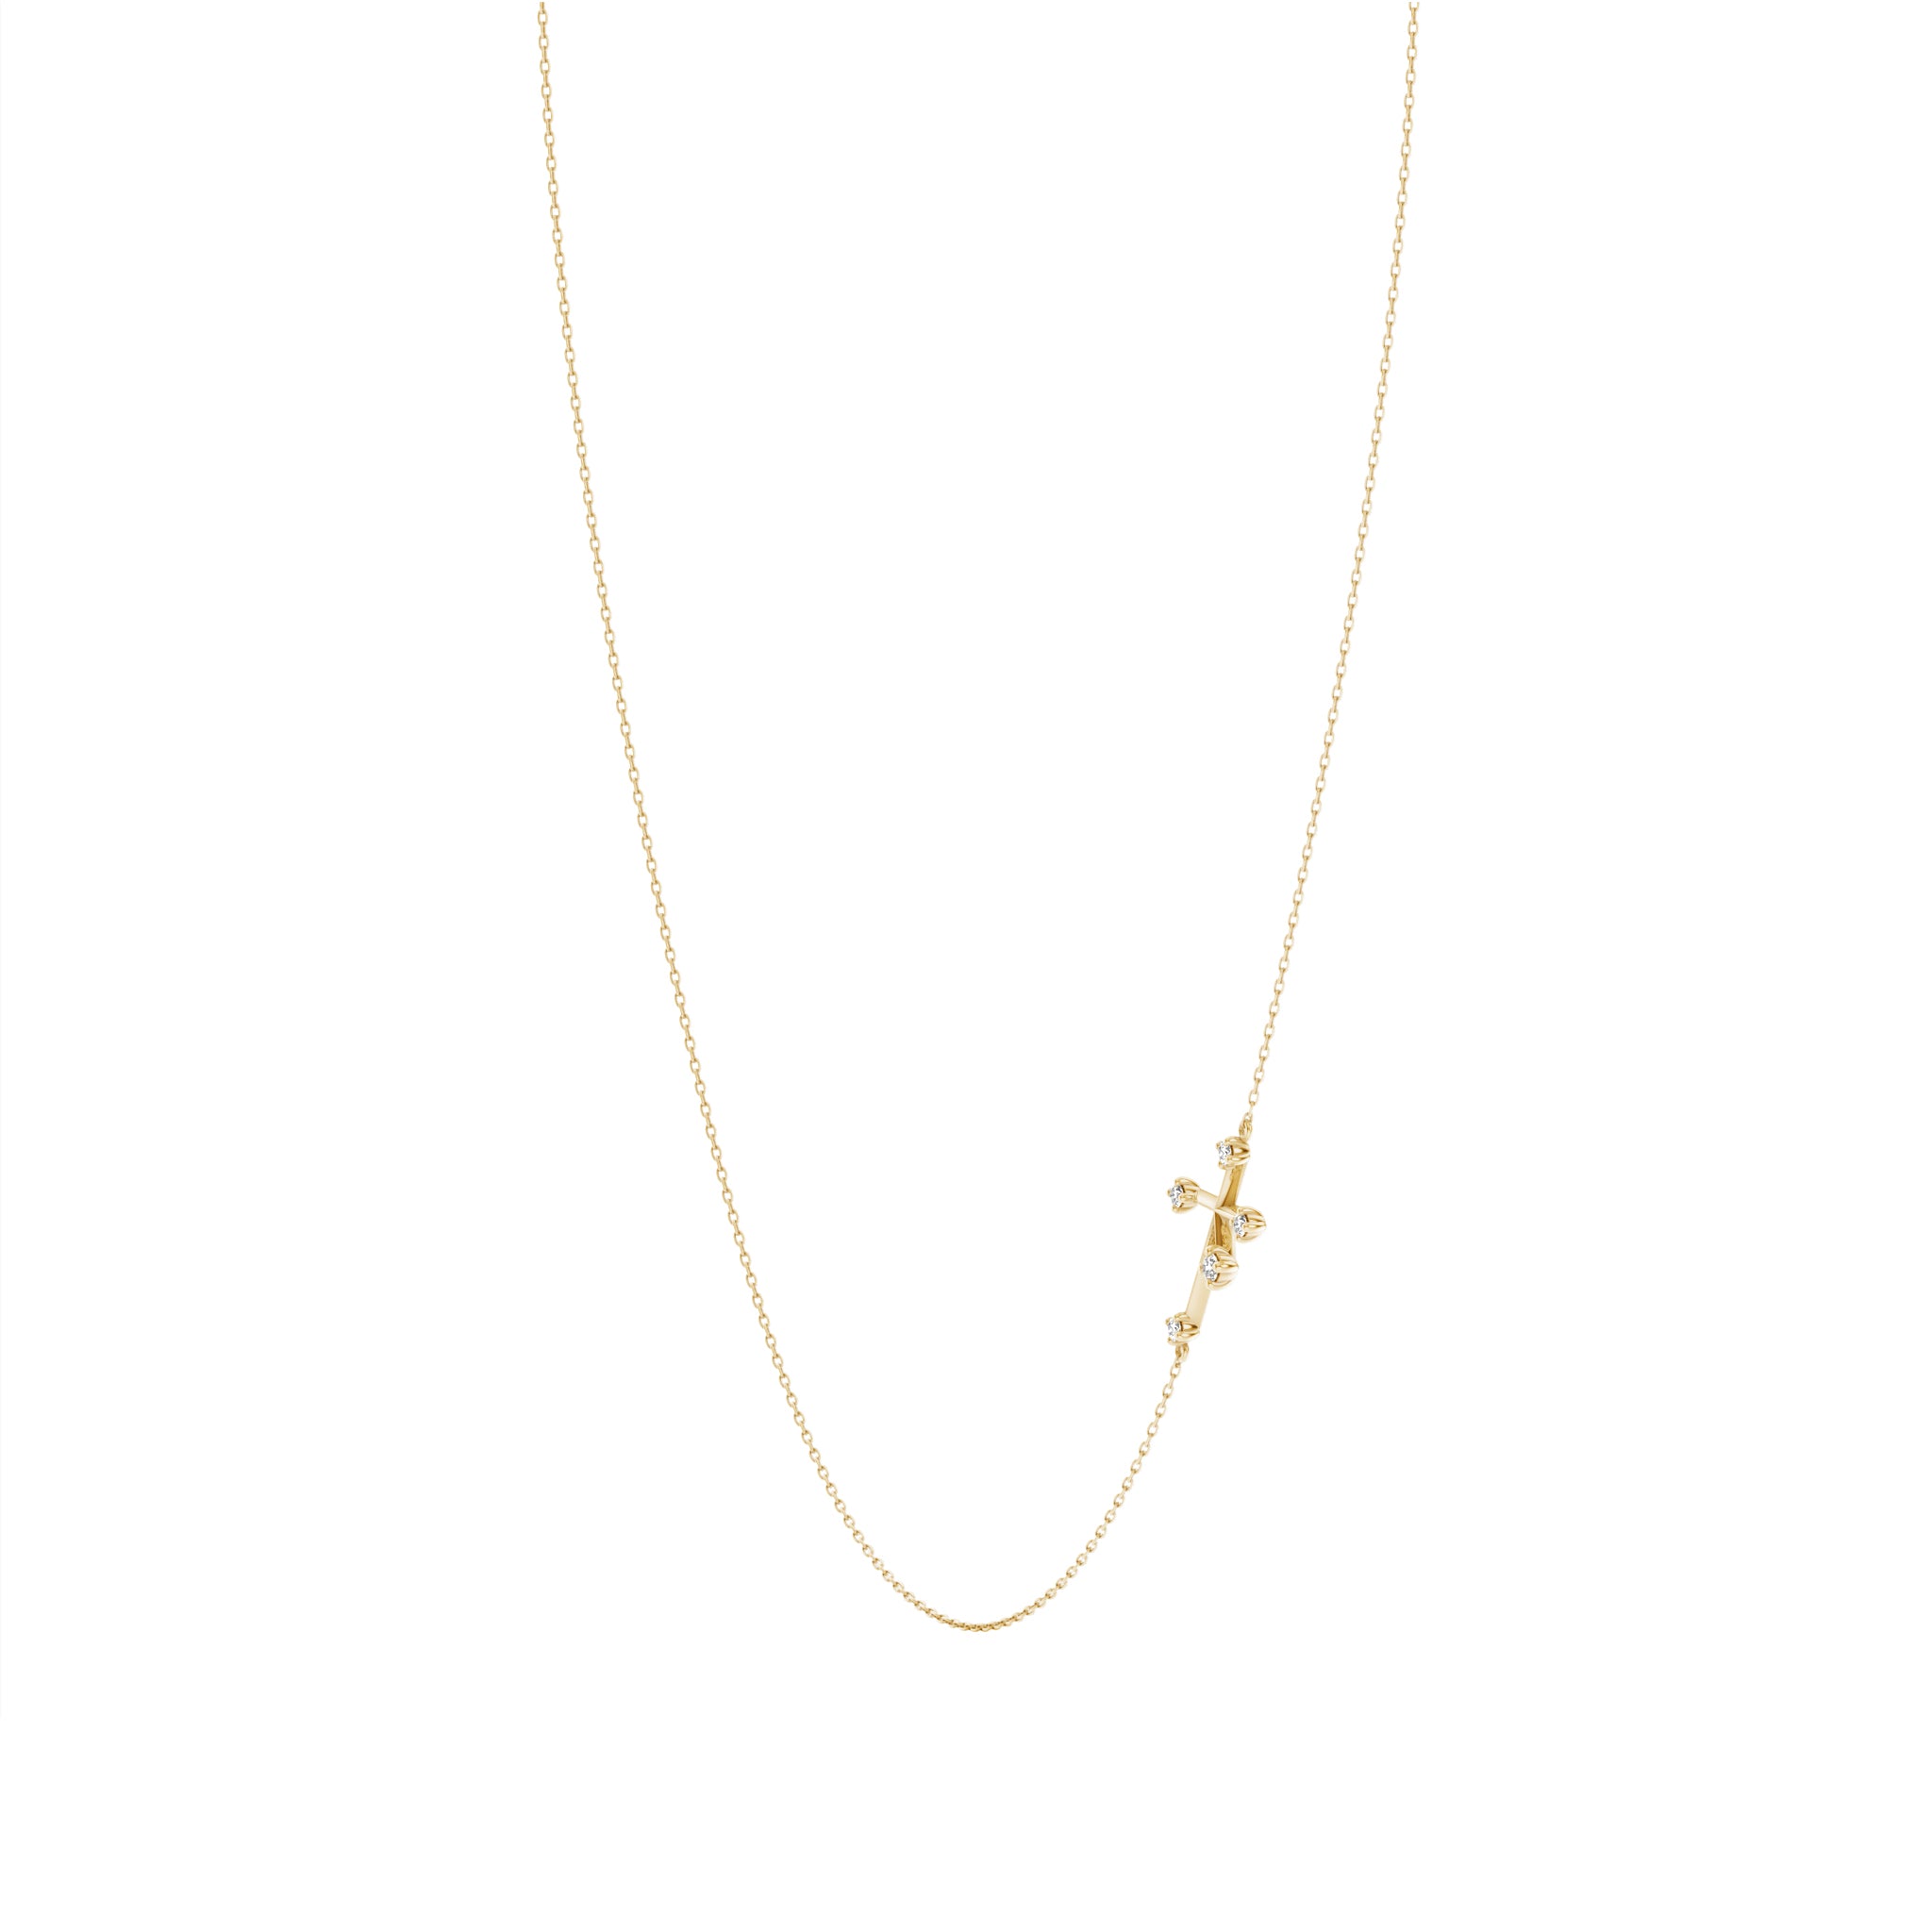 Shimansky - Southern Cross Diamond Necklace Crafted in 14K Yellow Gold